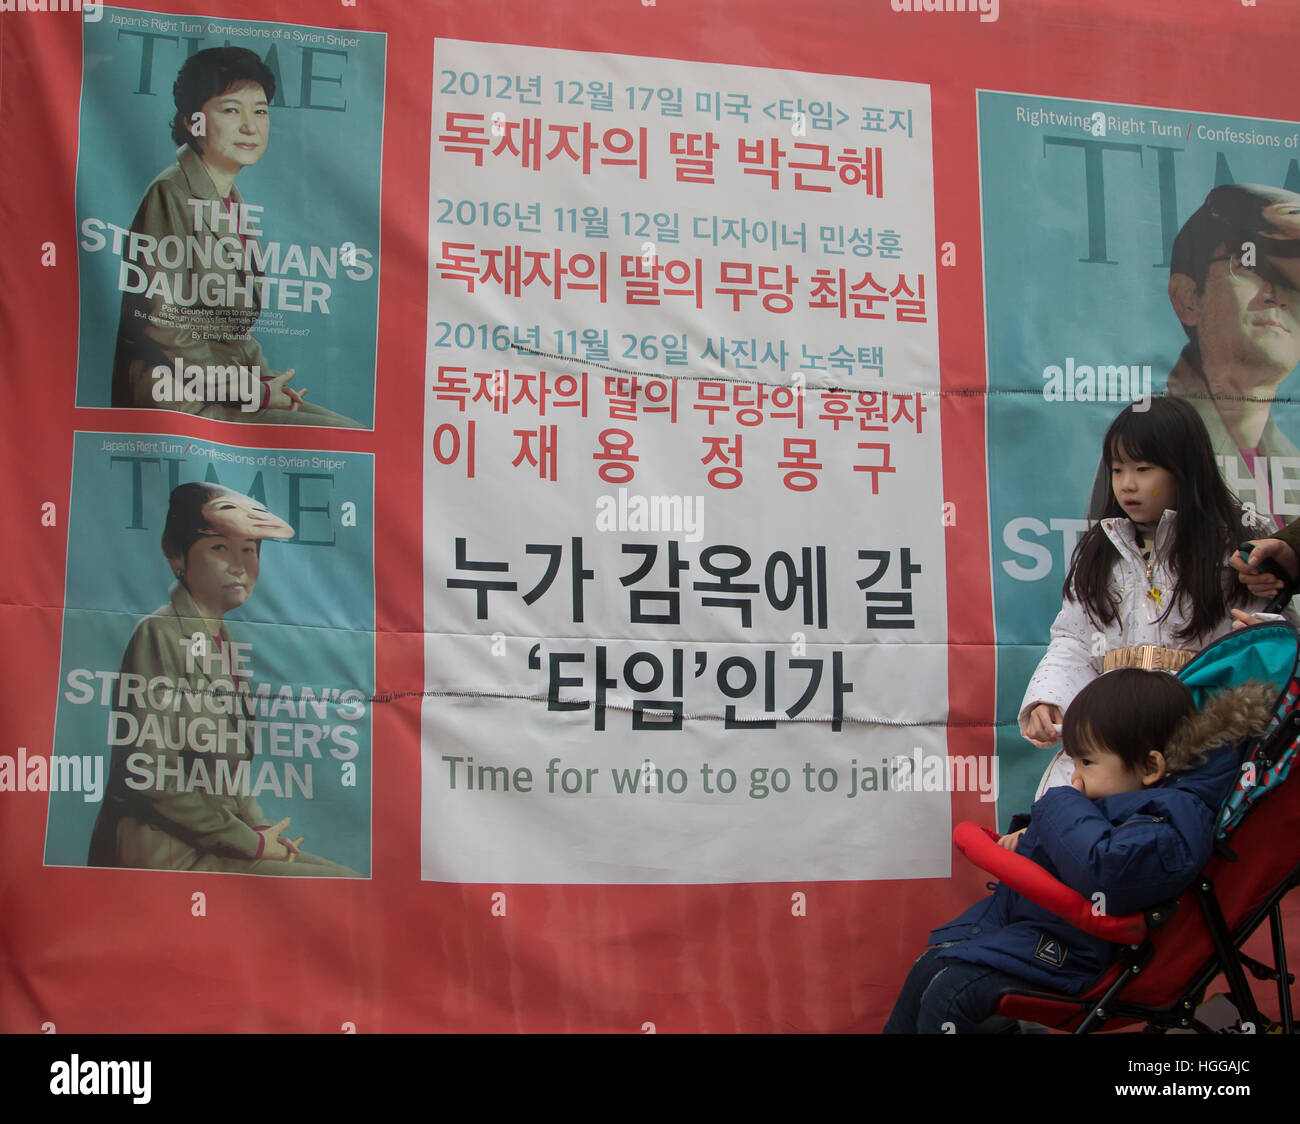 South Korea Politics, Jan 7, 2017 : Portraits of South Korean President Park Geun-hye (top) and her long-time friend Choi Soon-Sil are seen on a work that local artists created to criticize them during a rally in Seoul, South Korea. About 600,000 people on Saturday participated in a rally in Seoul, held over an influence-peddling scandal centered on Park and her long-time friend Choi Soon-Sil. Park and Choi allegedly extracted US$64.7 million from conglomerates to set up private foundations controlled by Choi. People demanded President Park to step down during a rally, which was held also to m Stock Photo